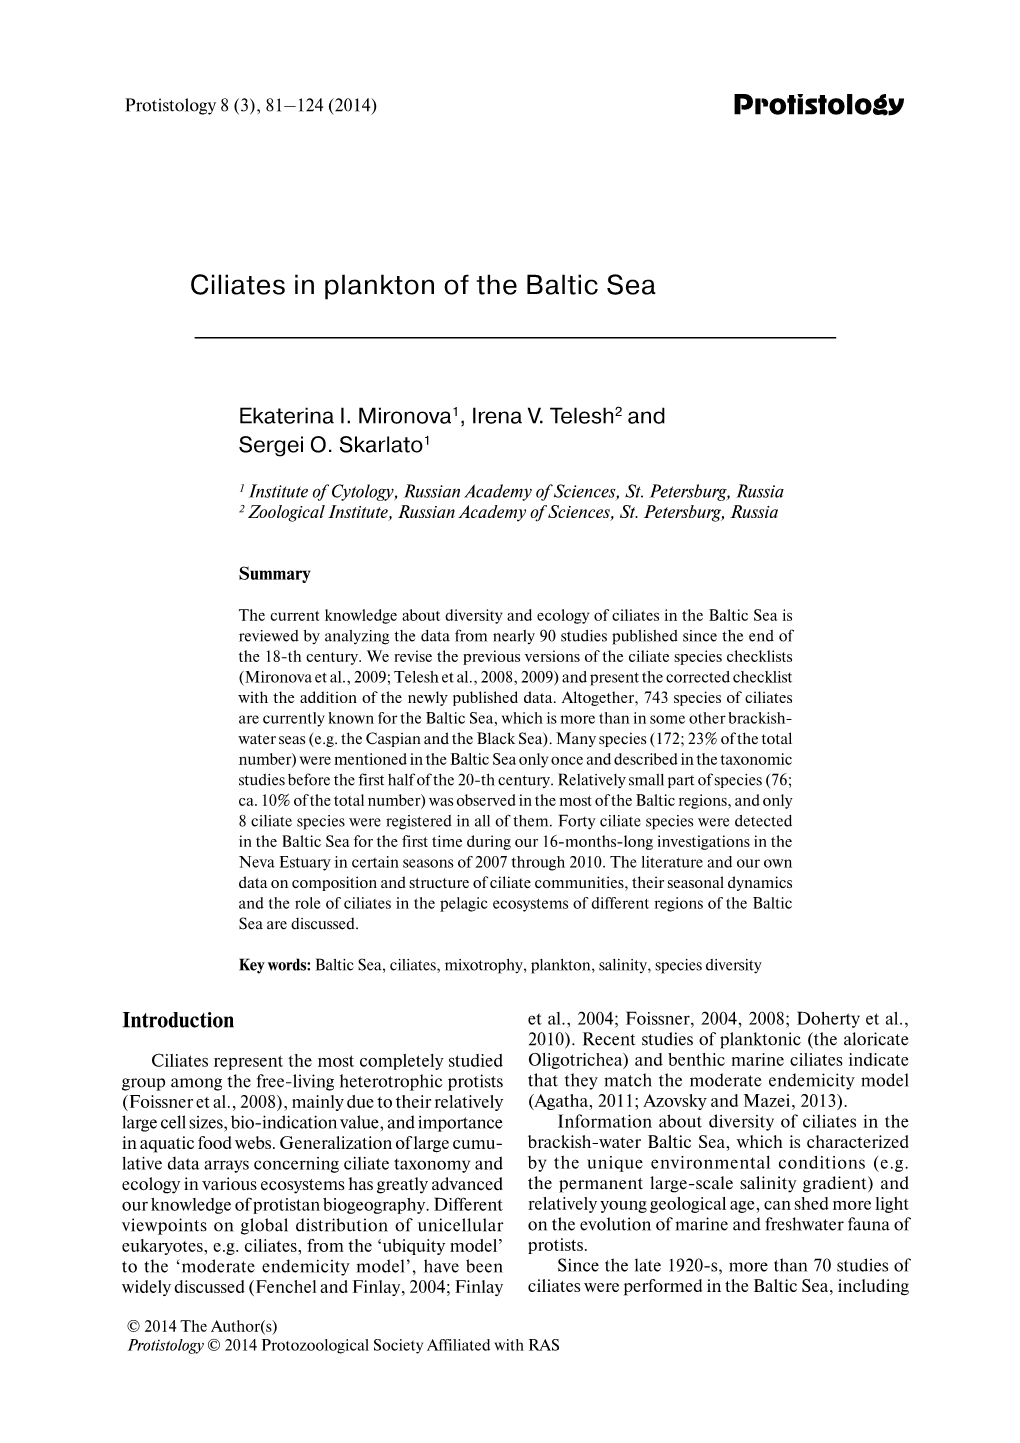 Protistology Ciliates in Plankton of the Baltic